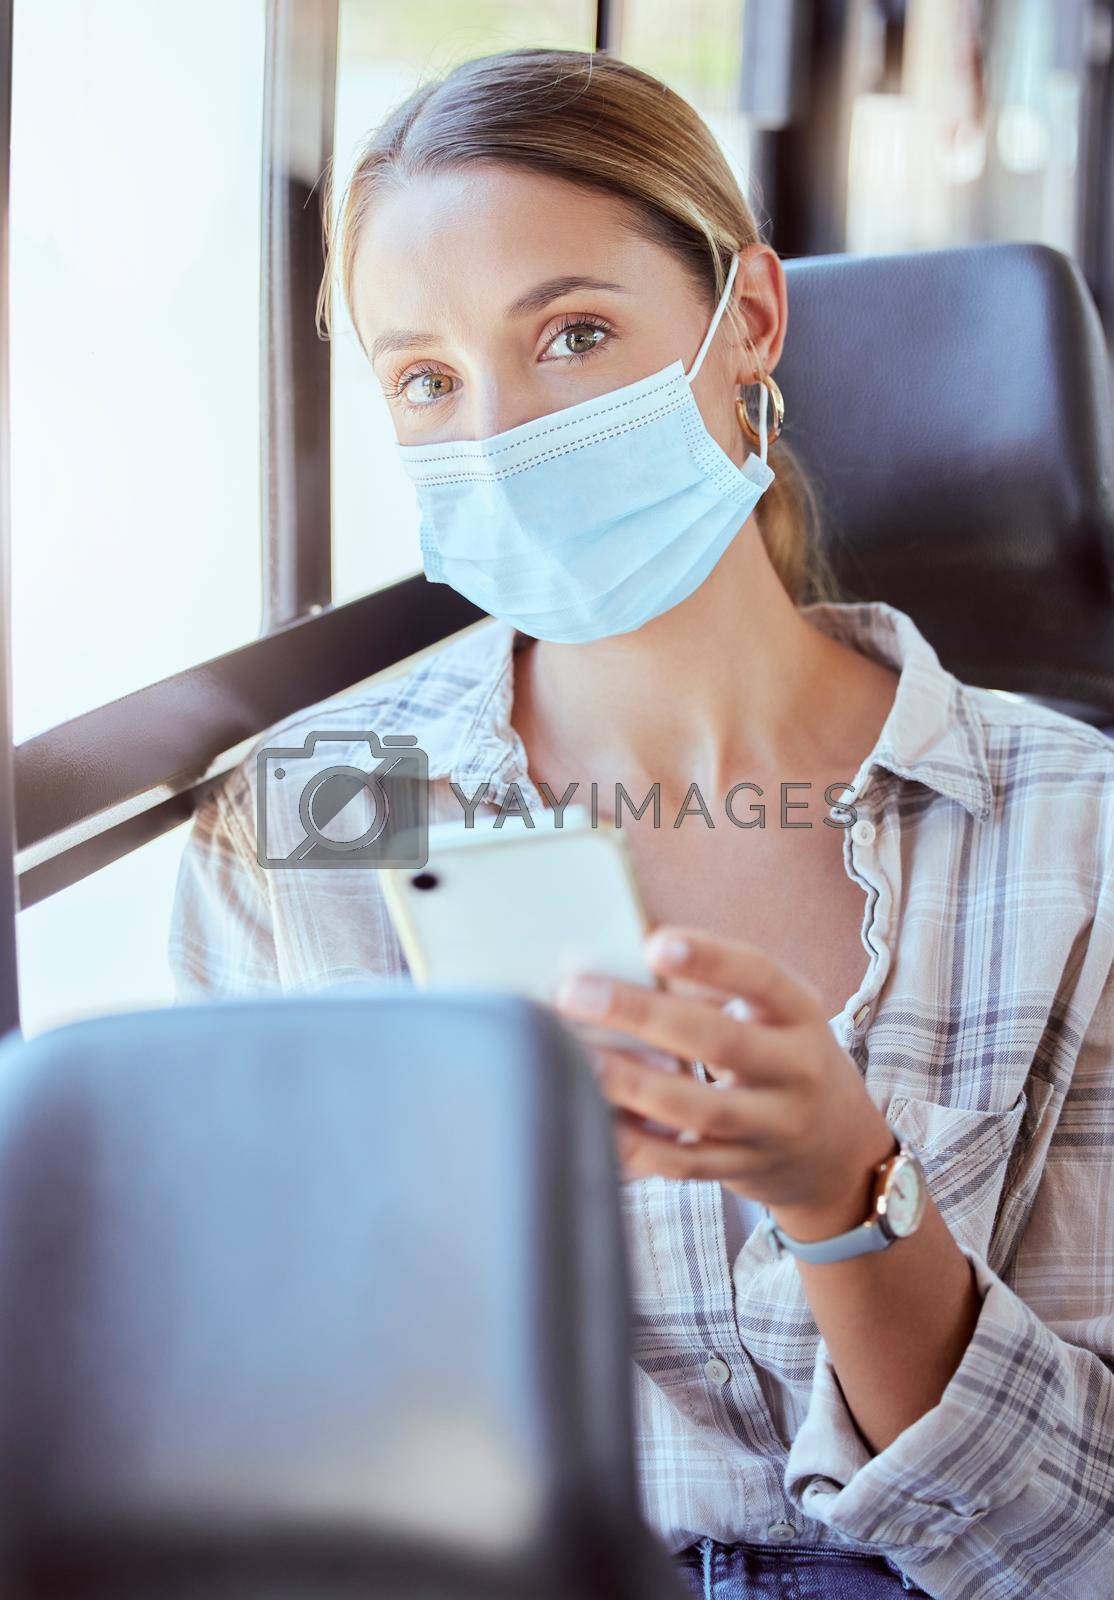 Woman, covid and phone in travel bus for health safety, news and social media with mask. Portrait of a female traveler in public transport during pandemic on mobile smartphone for communication.